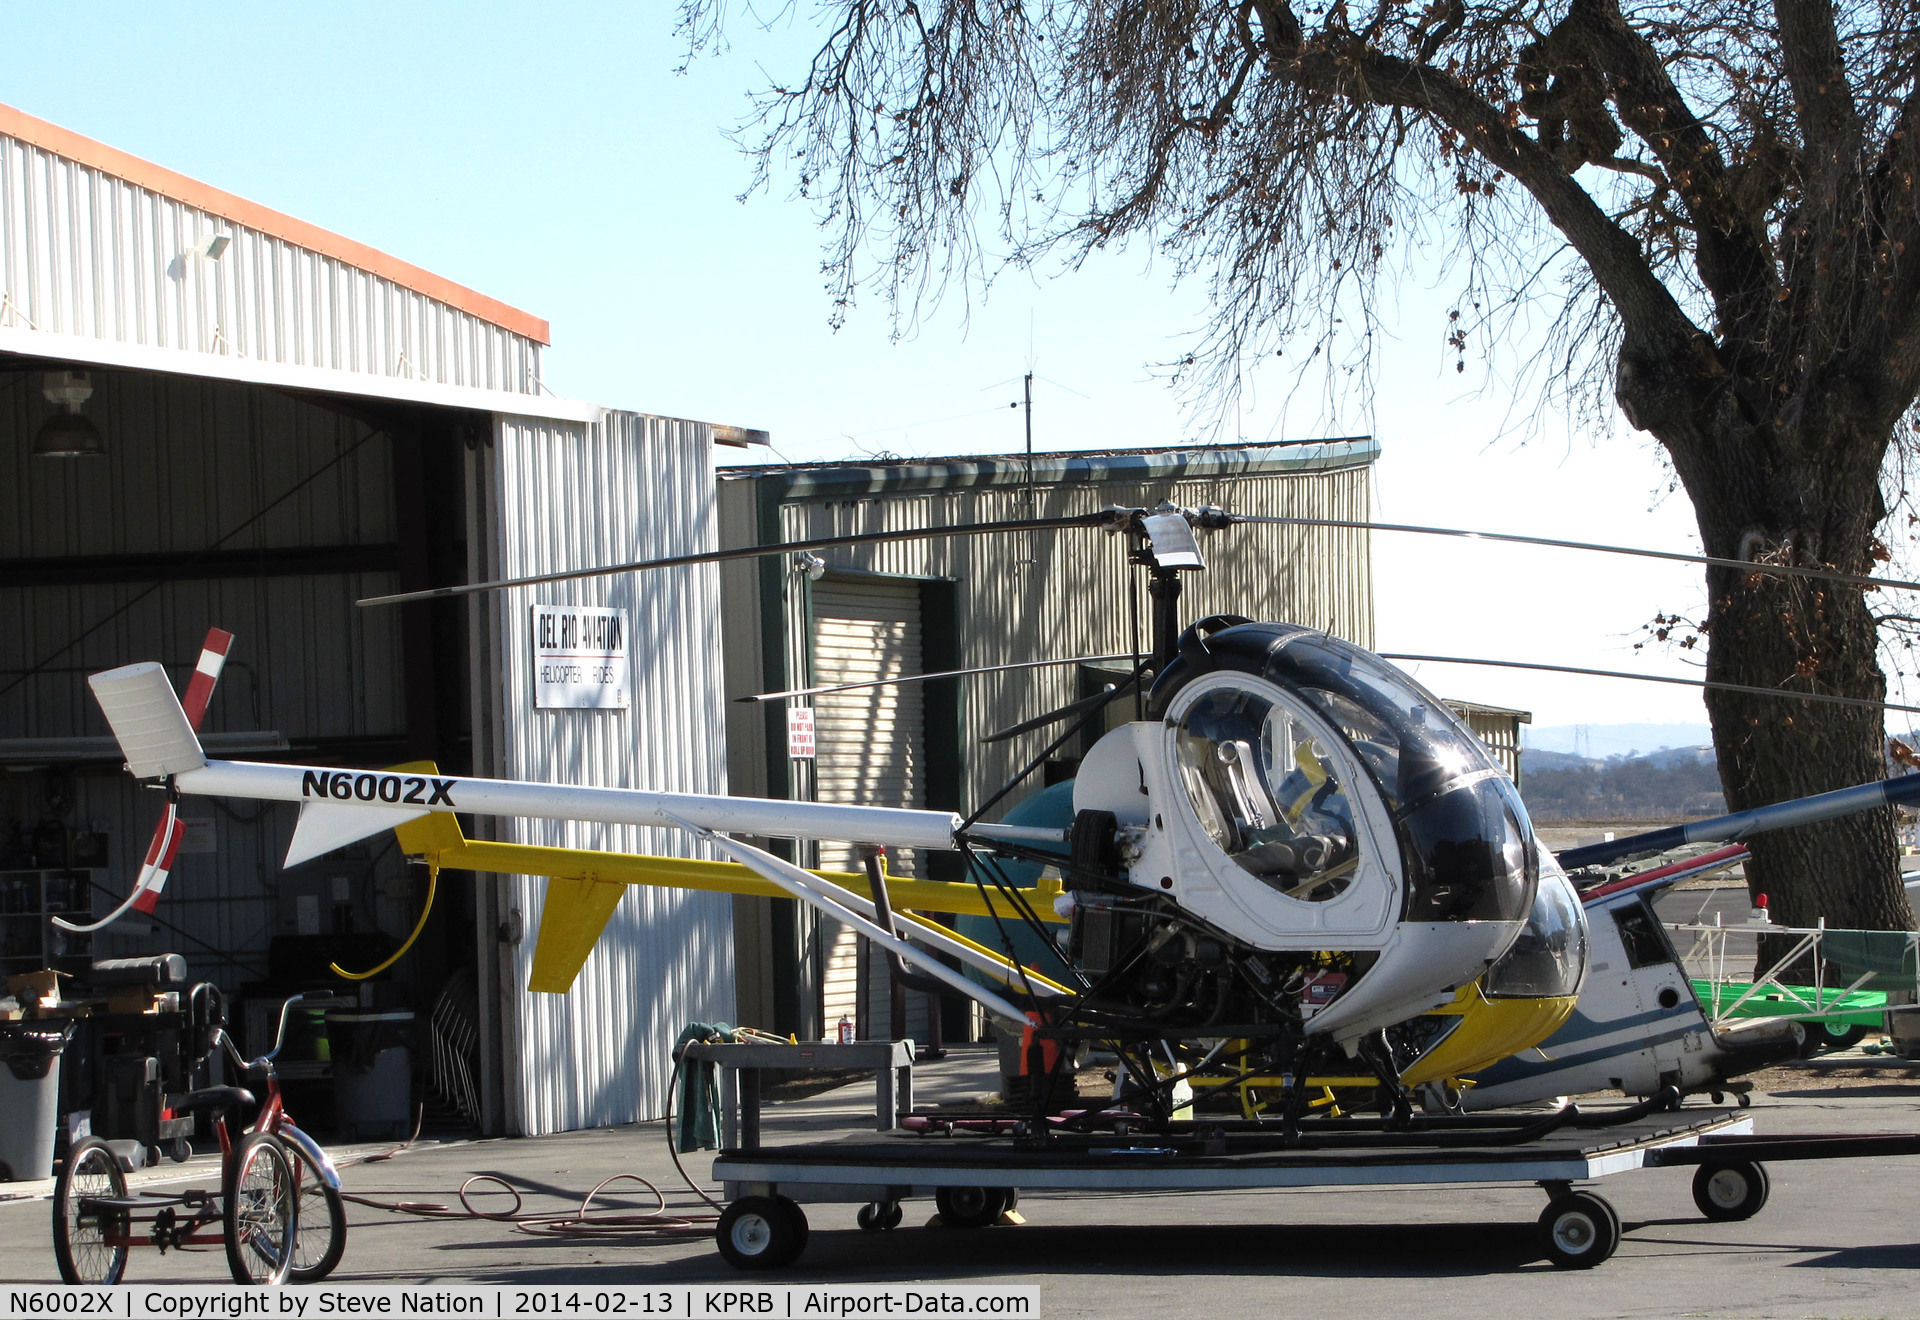 N6002X, 1993 Schweizer 269C-1 C/N 0001, Del Rio Aviation Schweizer 269C-1 ready to return to hangar @ Paso Robles Municipal Airport, CA [sold to fishing company in Mexico for fish spotting activities in late summer 2013]